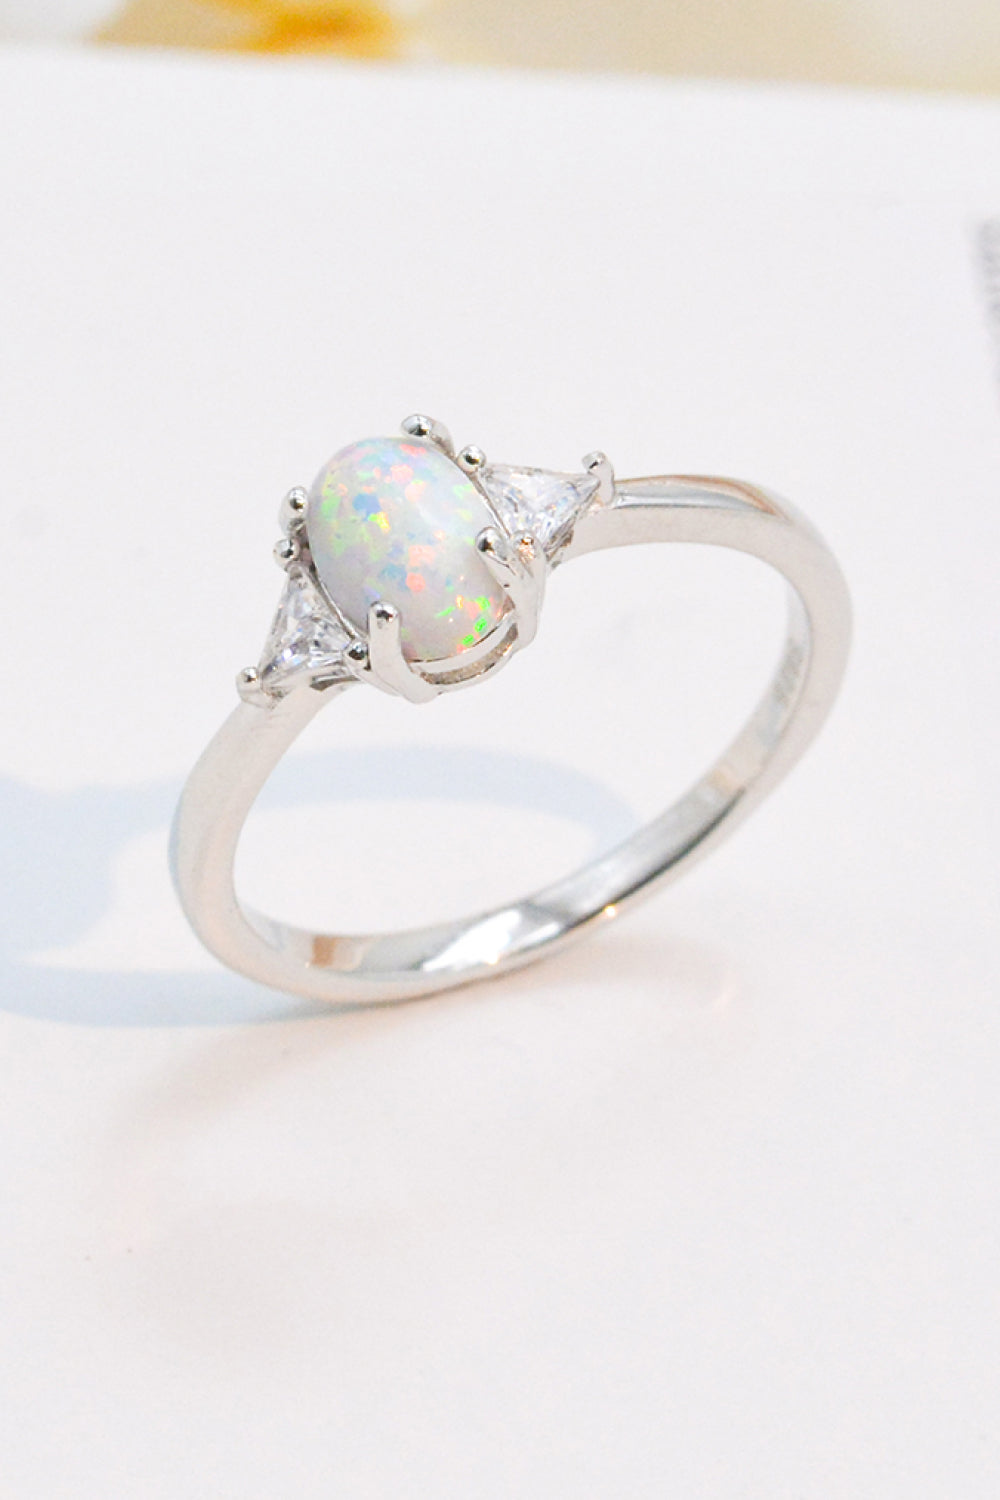 Contrast 925 Sterling Silver Opal Ring